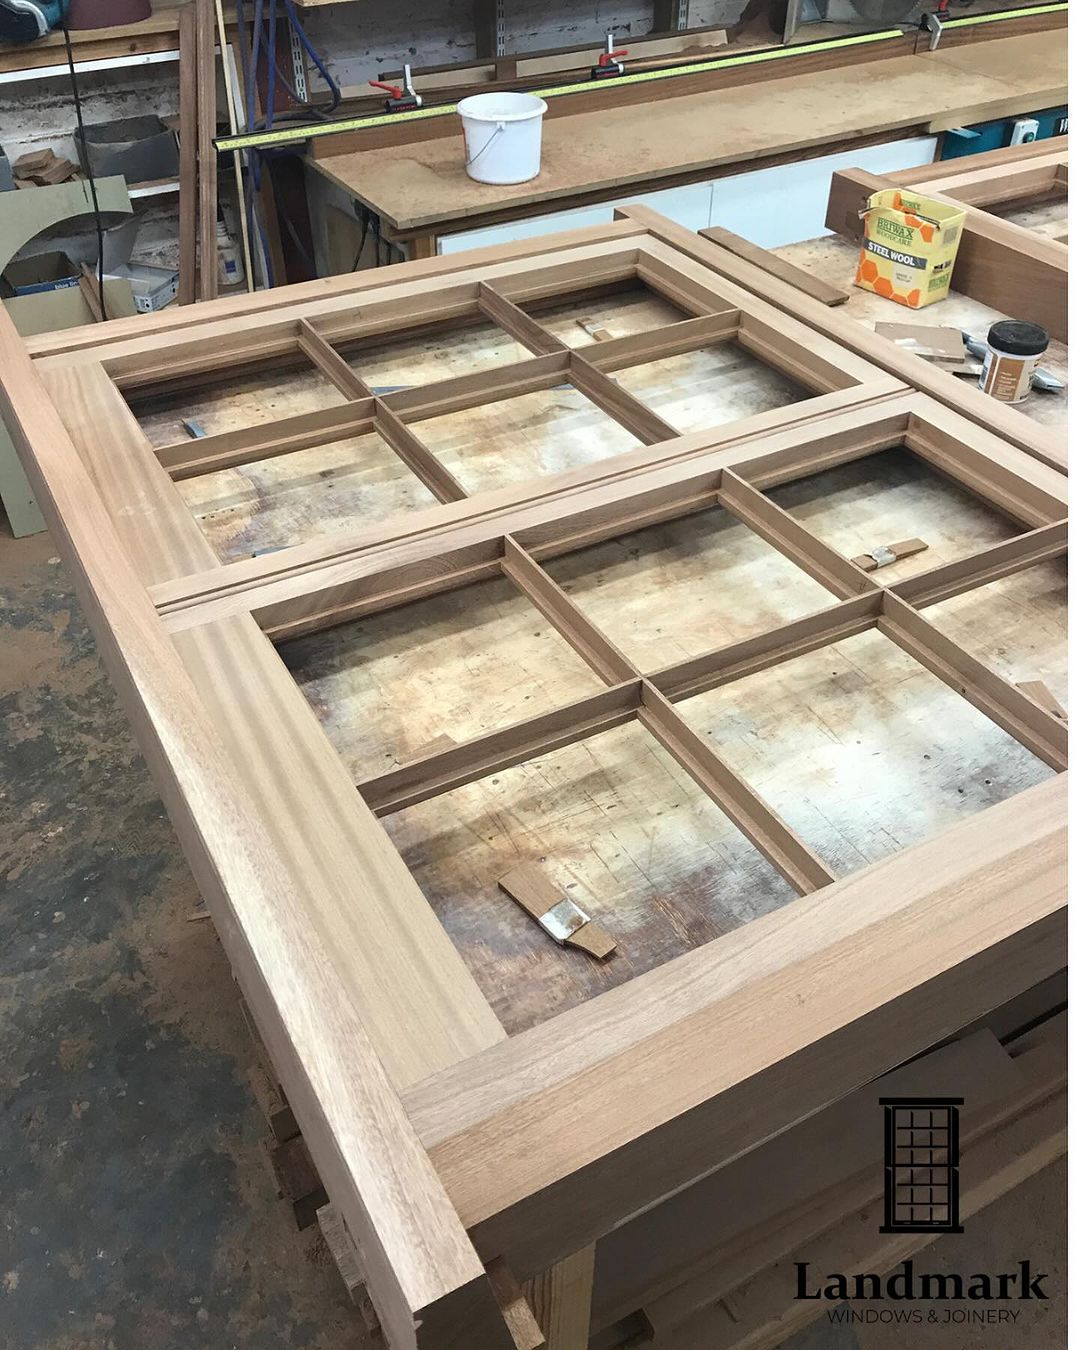 A wooden table with a window frame on it in a workshop.